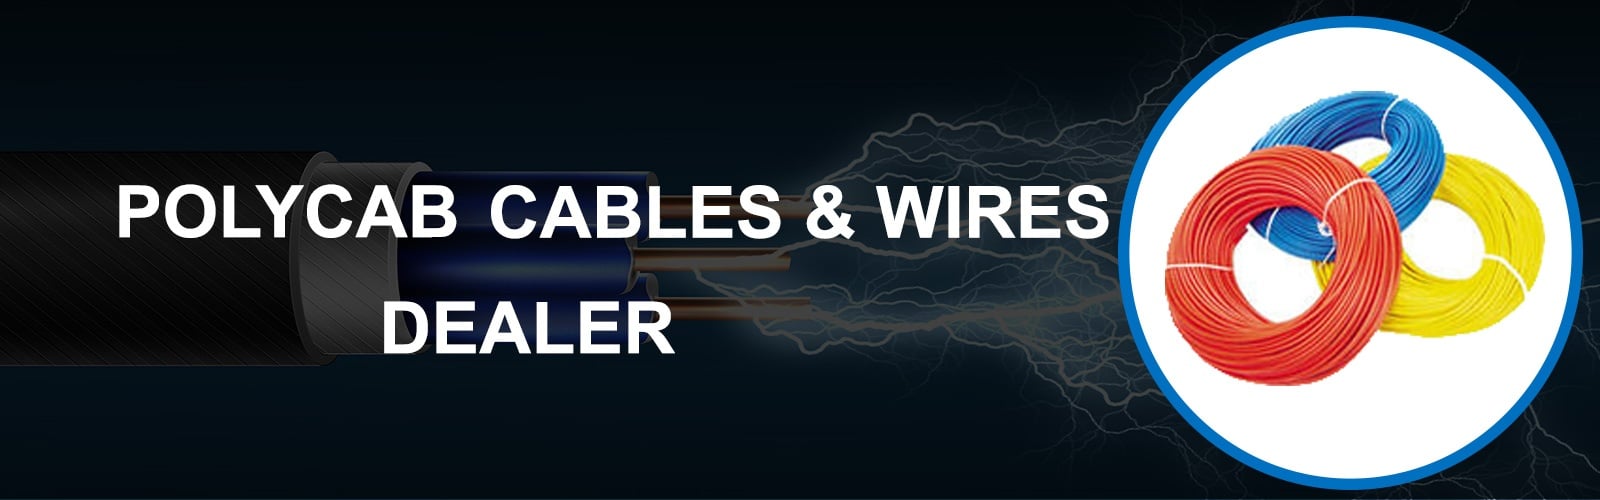 No.1 Polycab cables & Wires dealers in Kerala, India